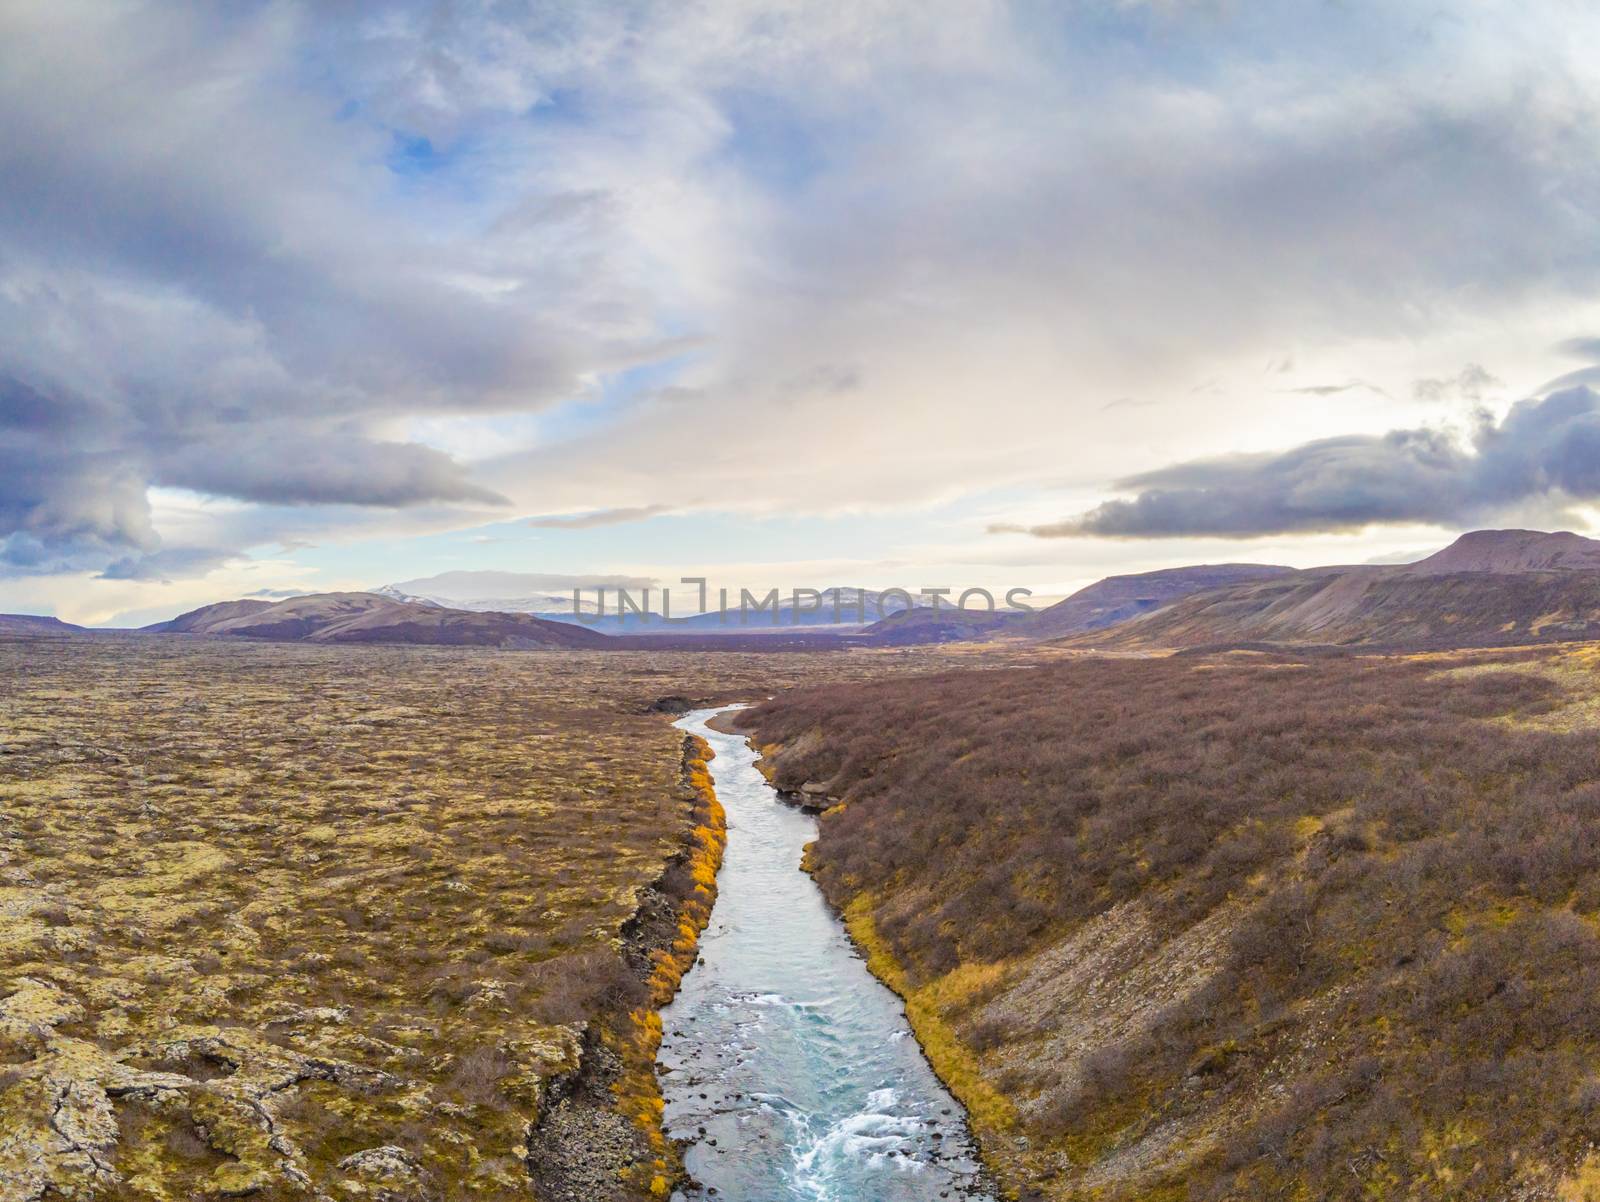 Hraunfossar series of waterfalls barnafoss aerial image of turquoise water next to lava field and the highlands